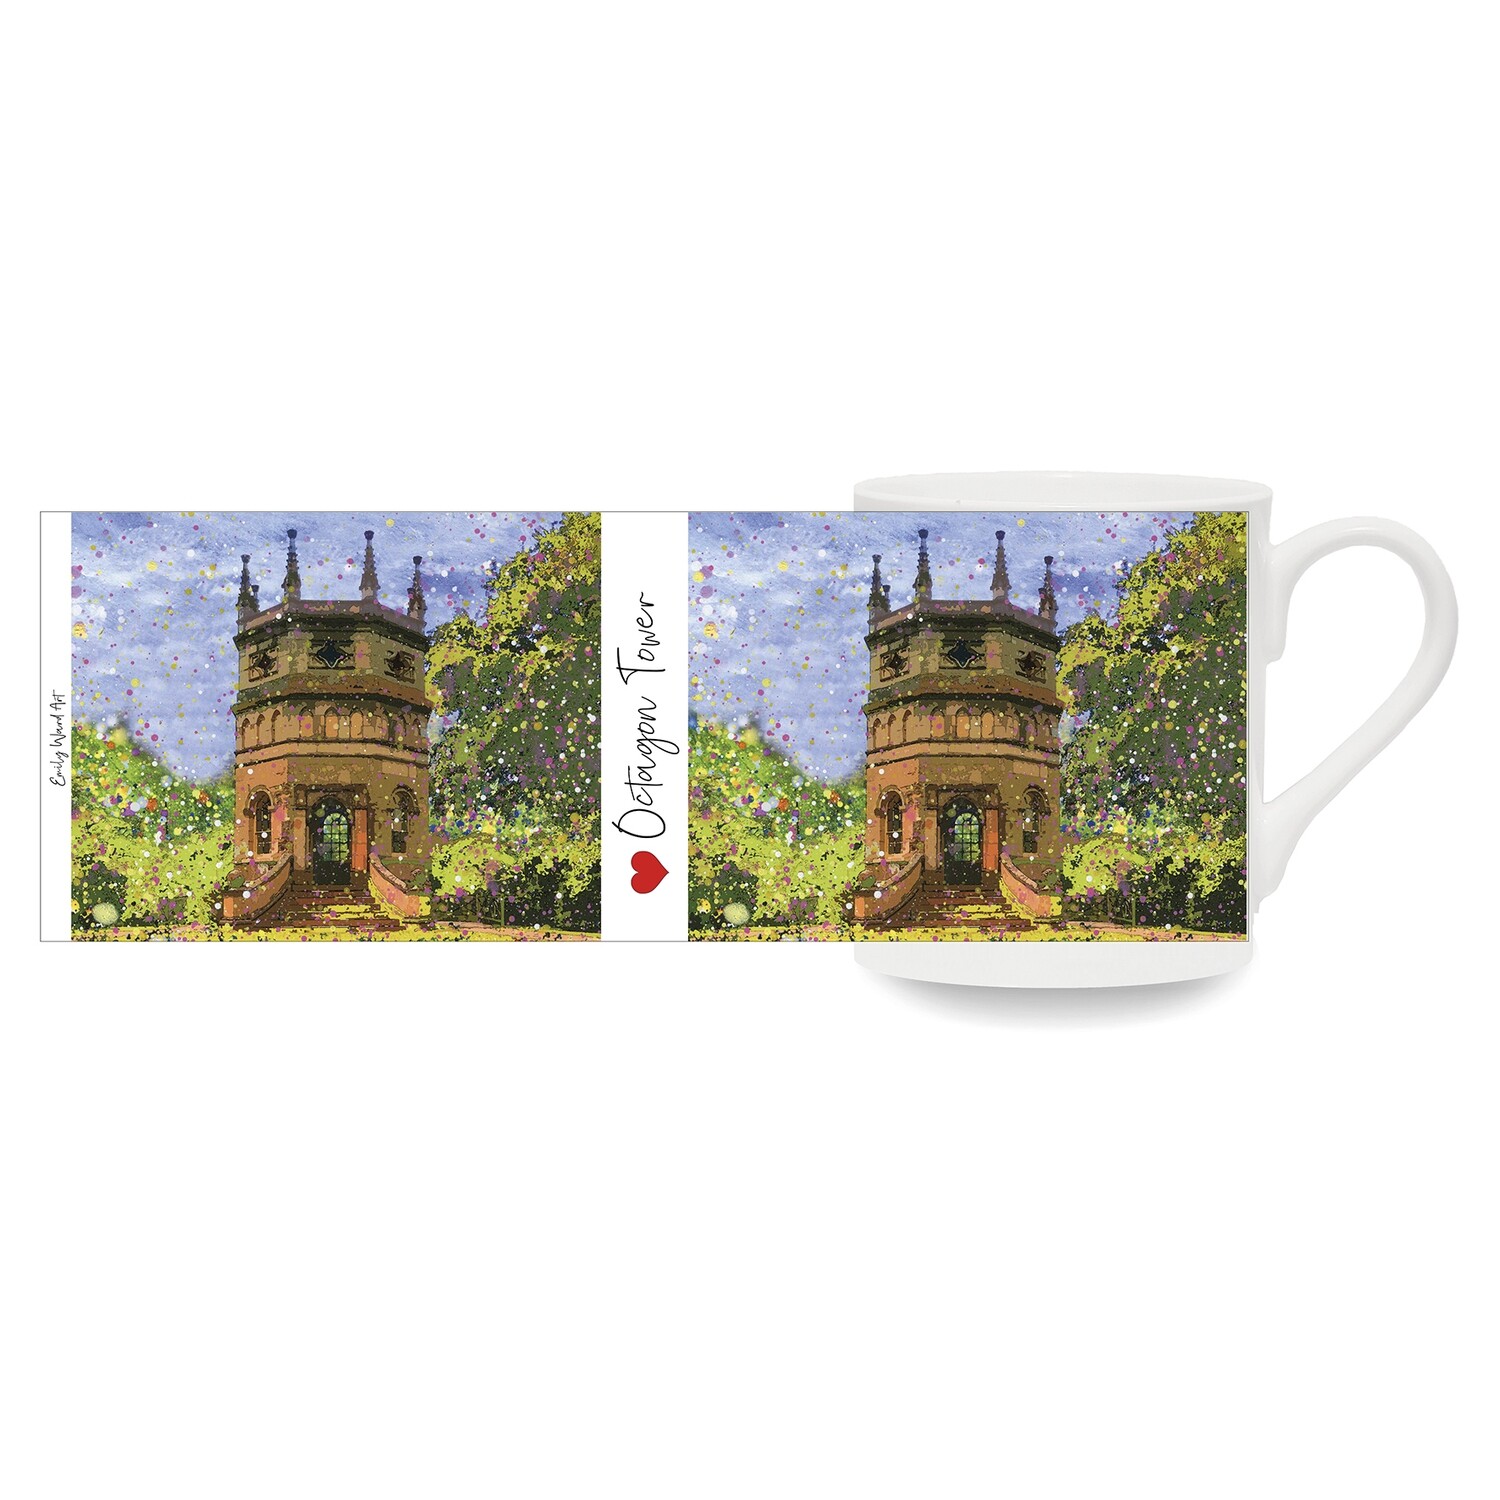 Octagon Tower, Studley Royal Water Garden Bone China Cup